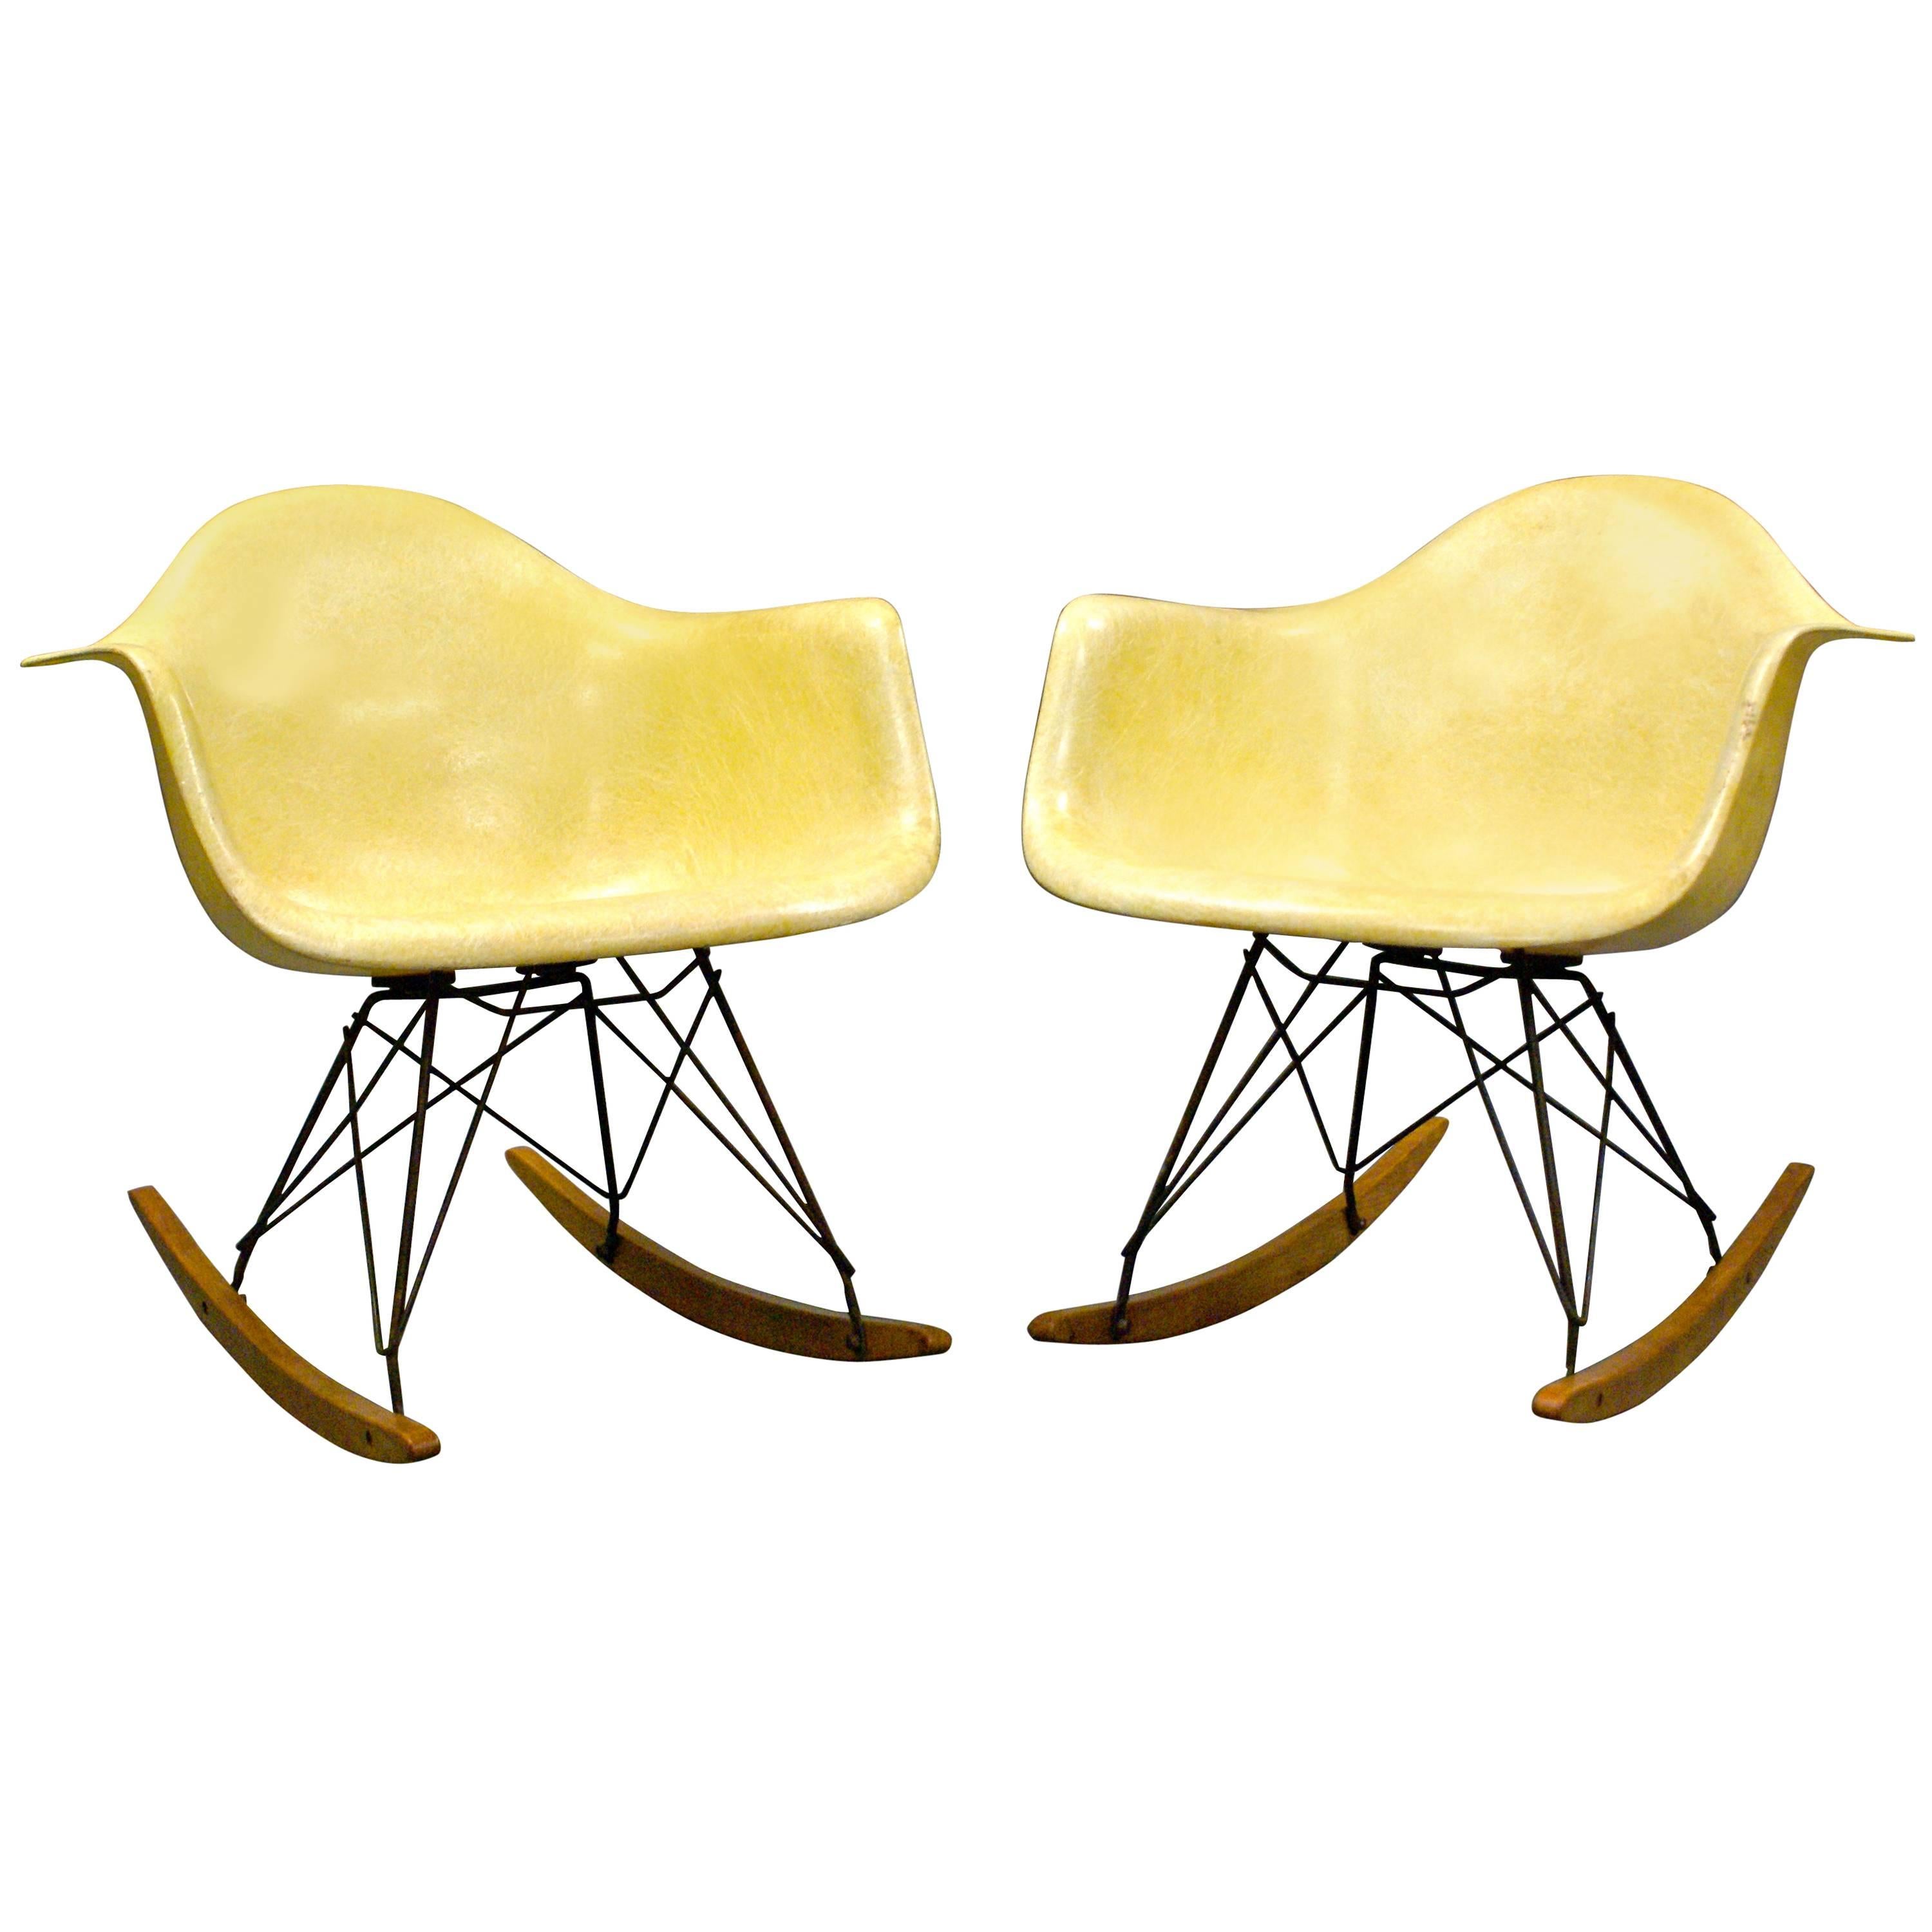 Pair of Early Rope Edge RAR Chairs by Charles and Ray Eames